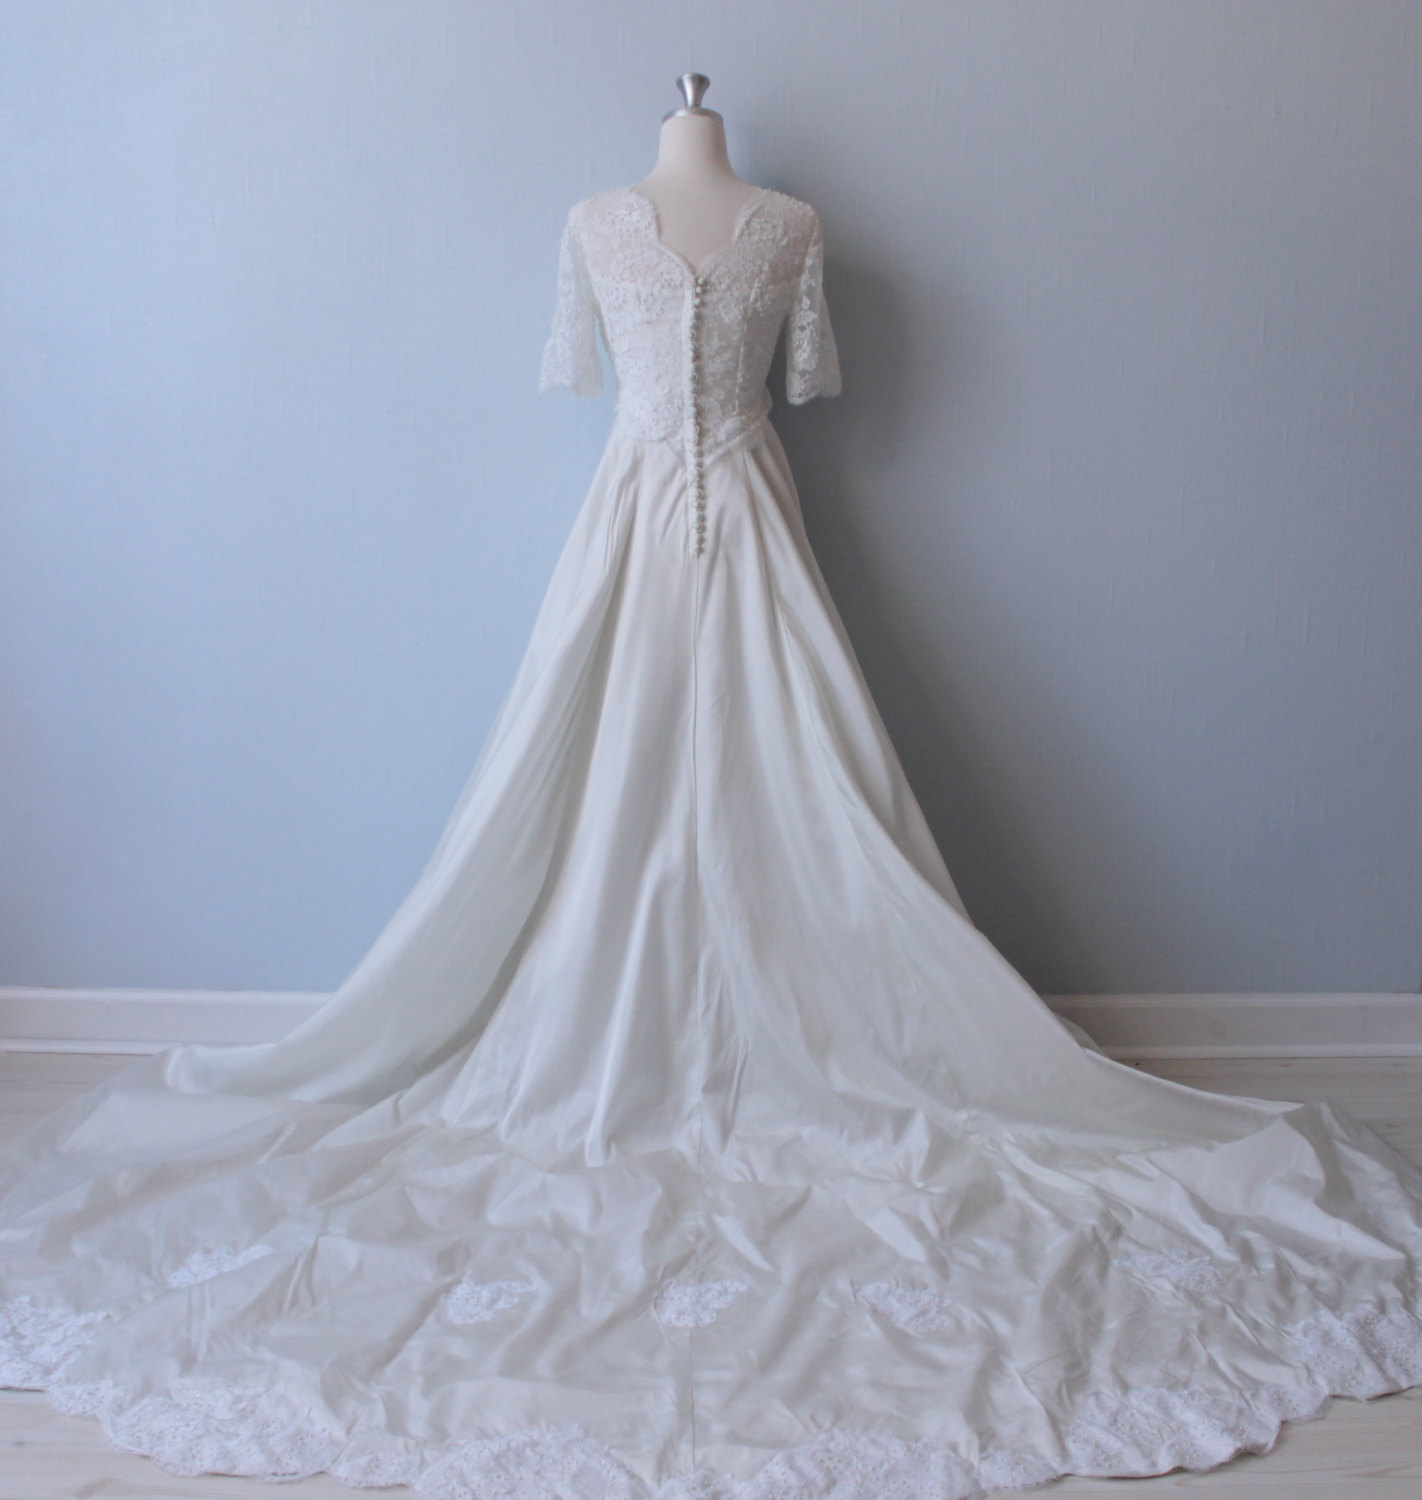 1960s Wedding Dress from The Vintage Mistress